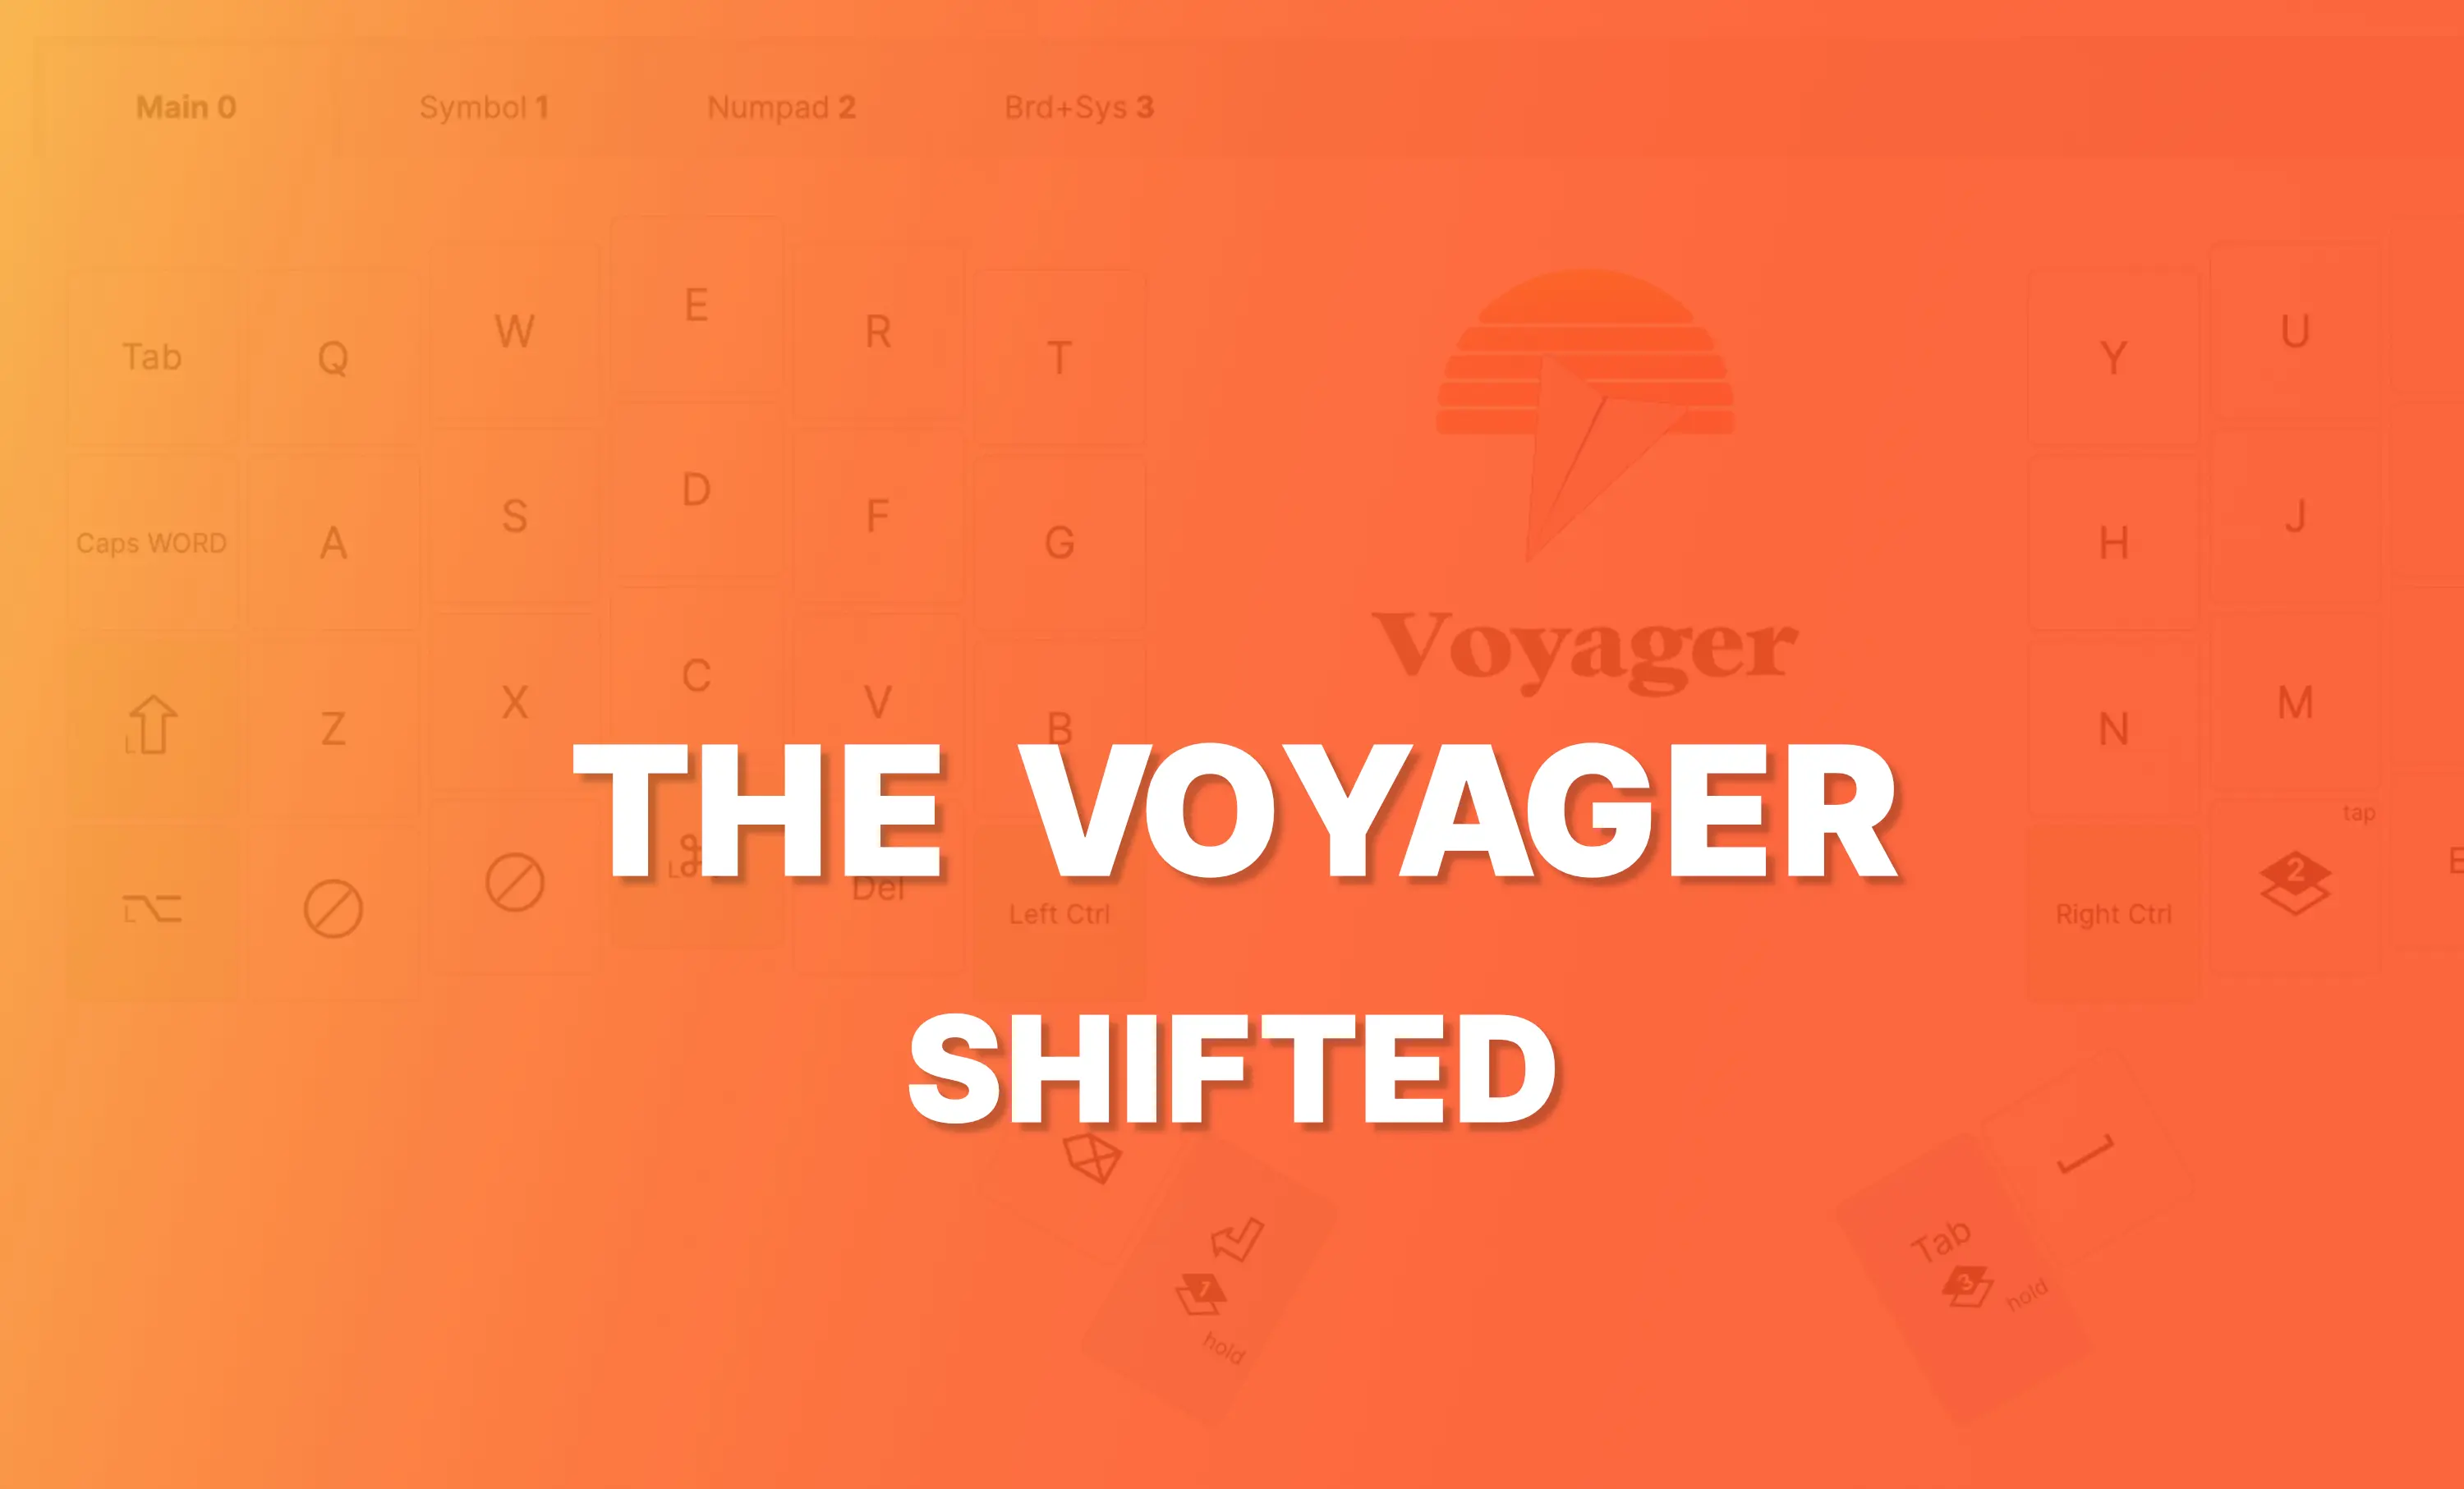 Shifted Voyager Layout